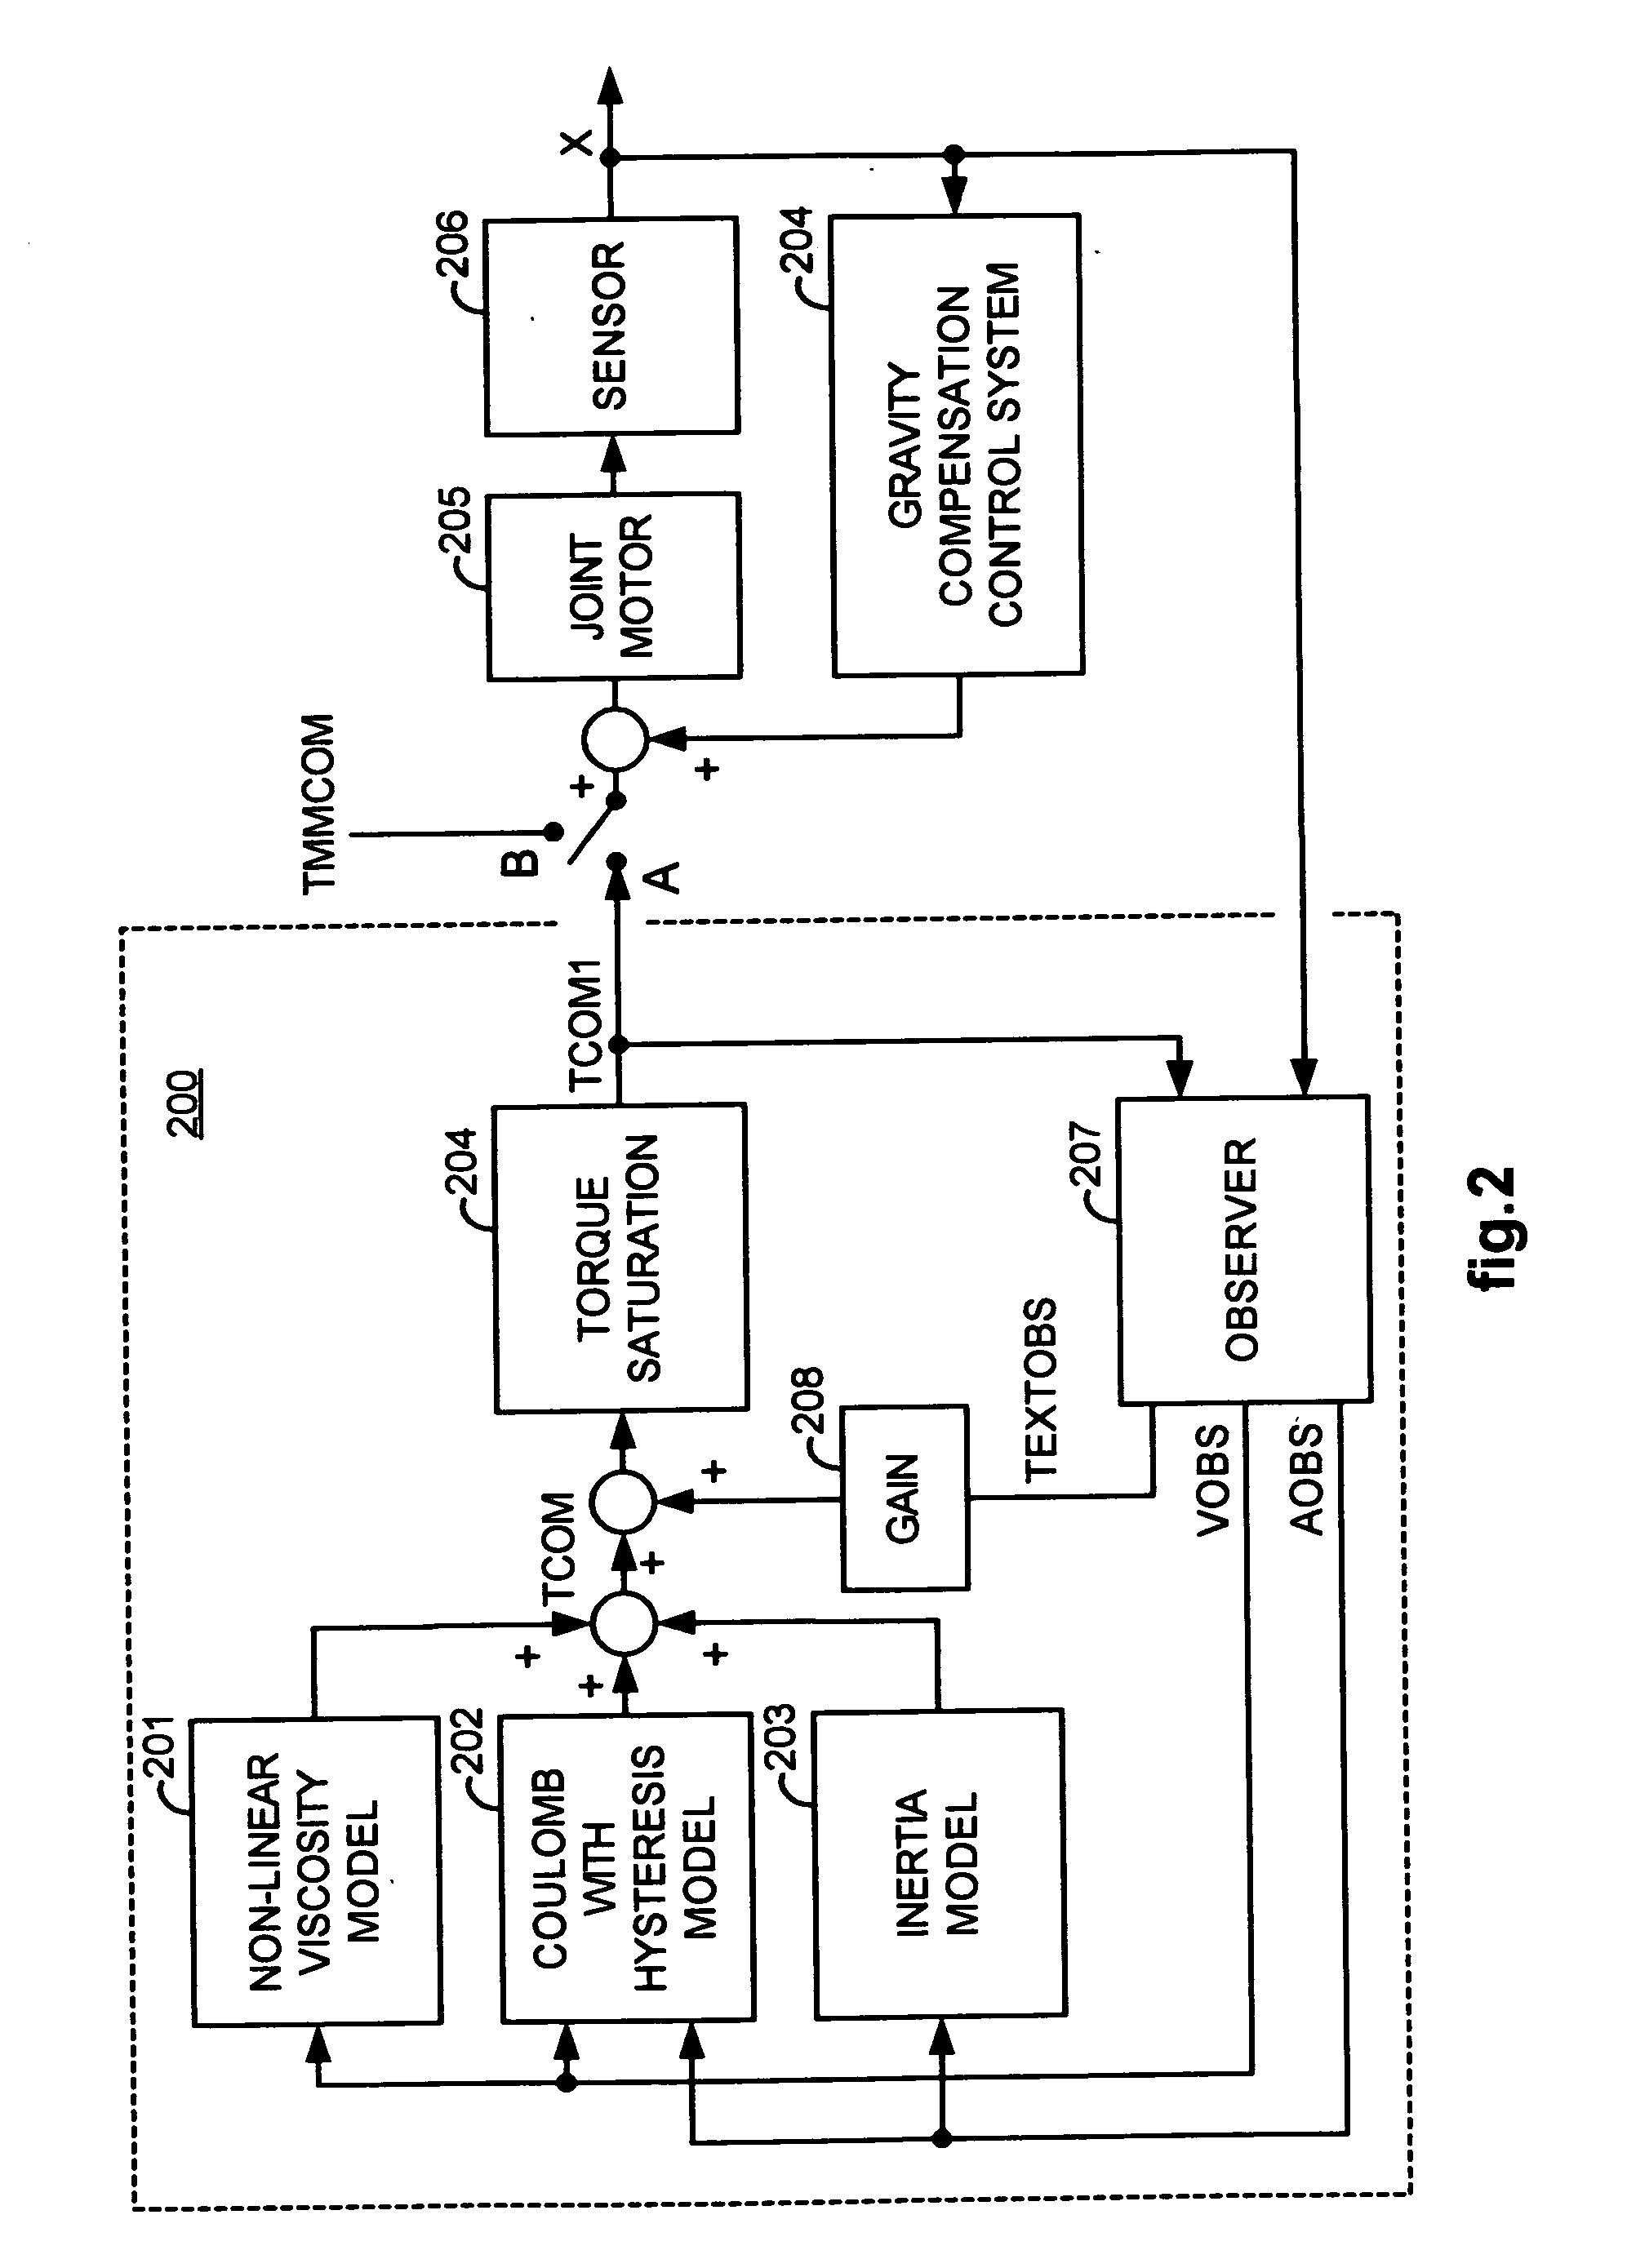 Control system for reducing internally generated frictional and inertial resistance to manual positioning of a surgical manipulator